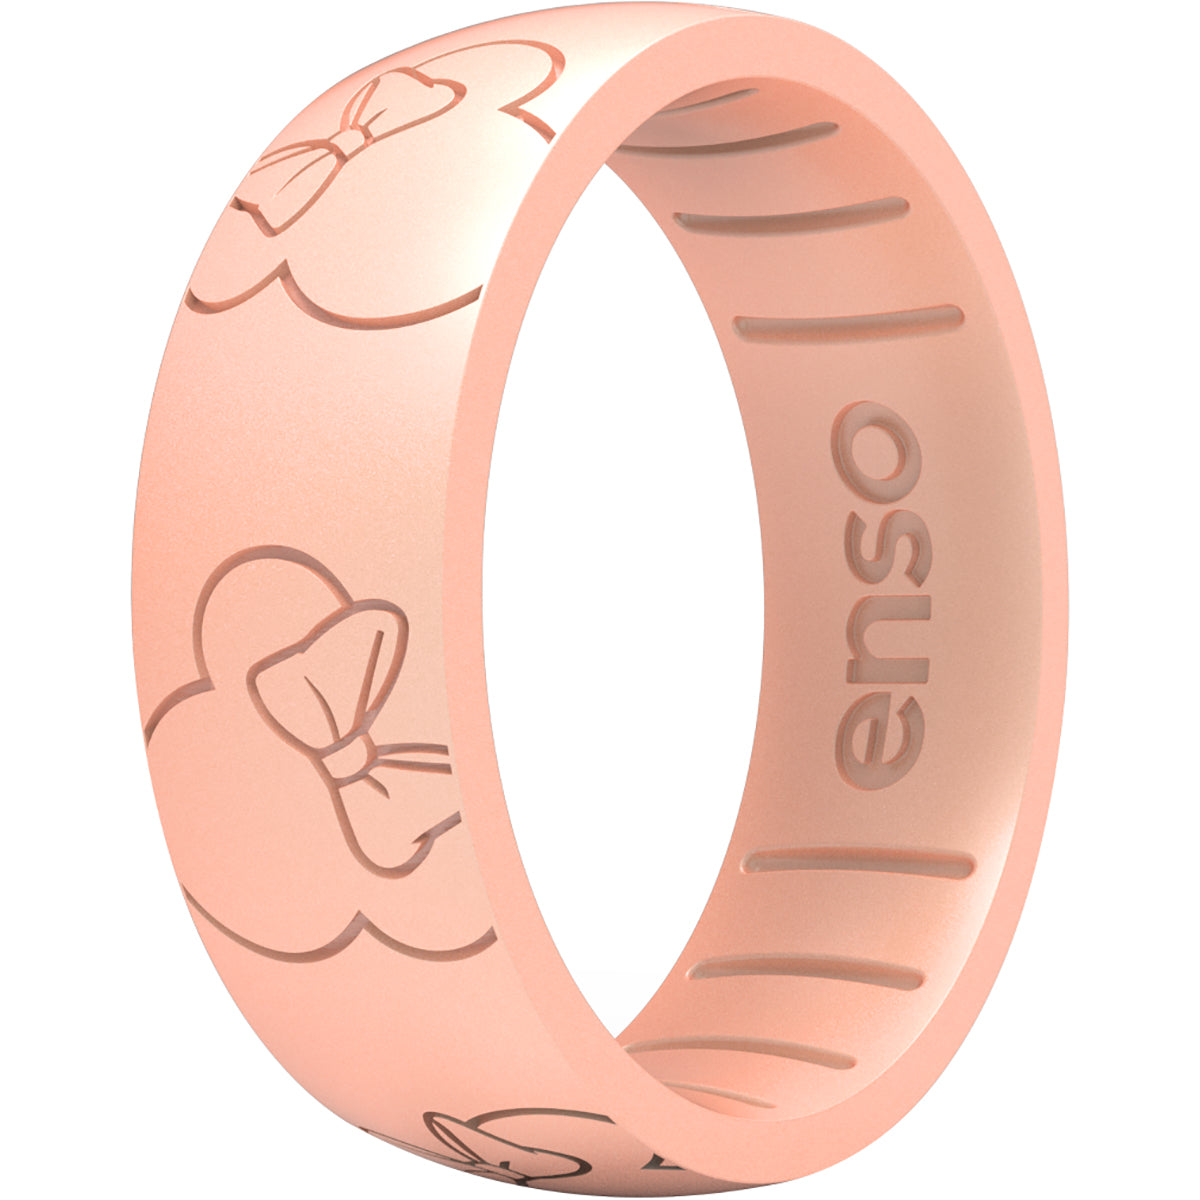 Enso Rings Disney Minnie Mouse All Around Ears Classic Silicone Ring - Rose Gold Enso Rings